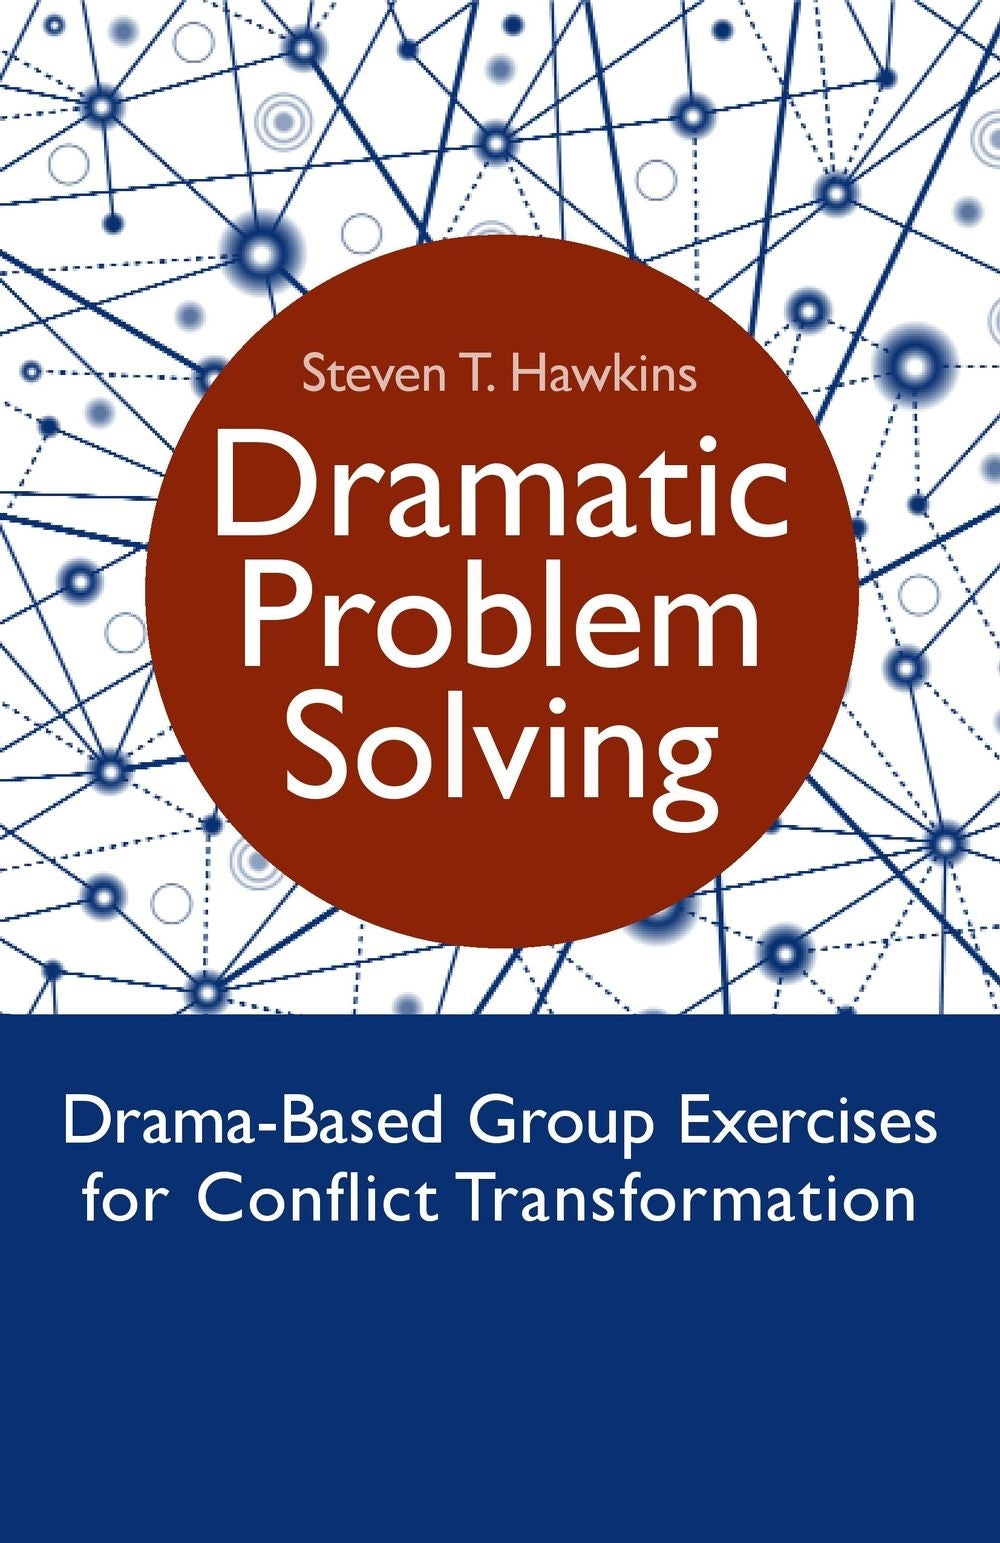 Dramatic Problem Solving by Steven Hawkins